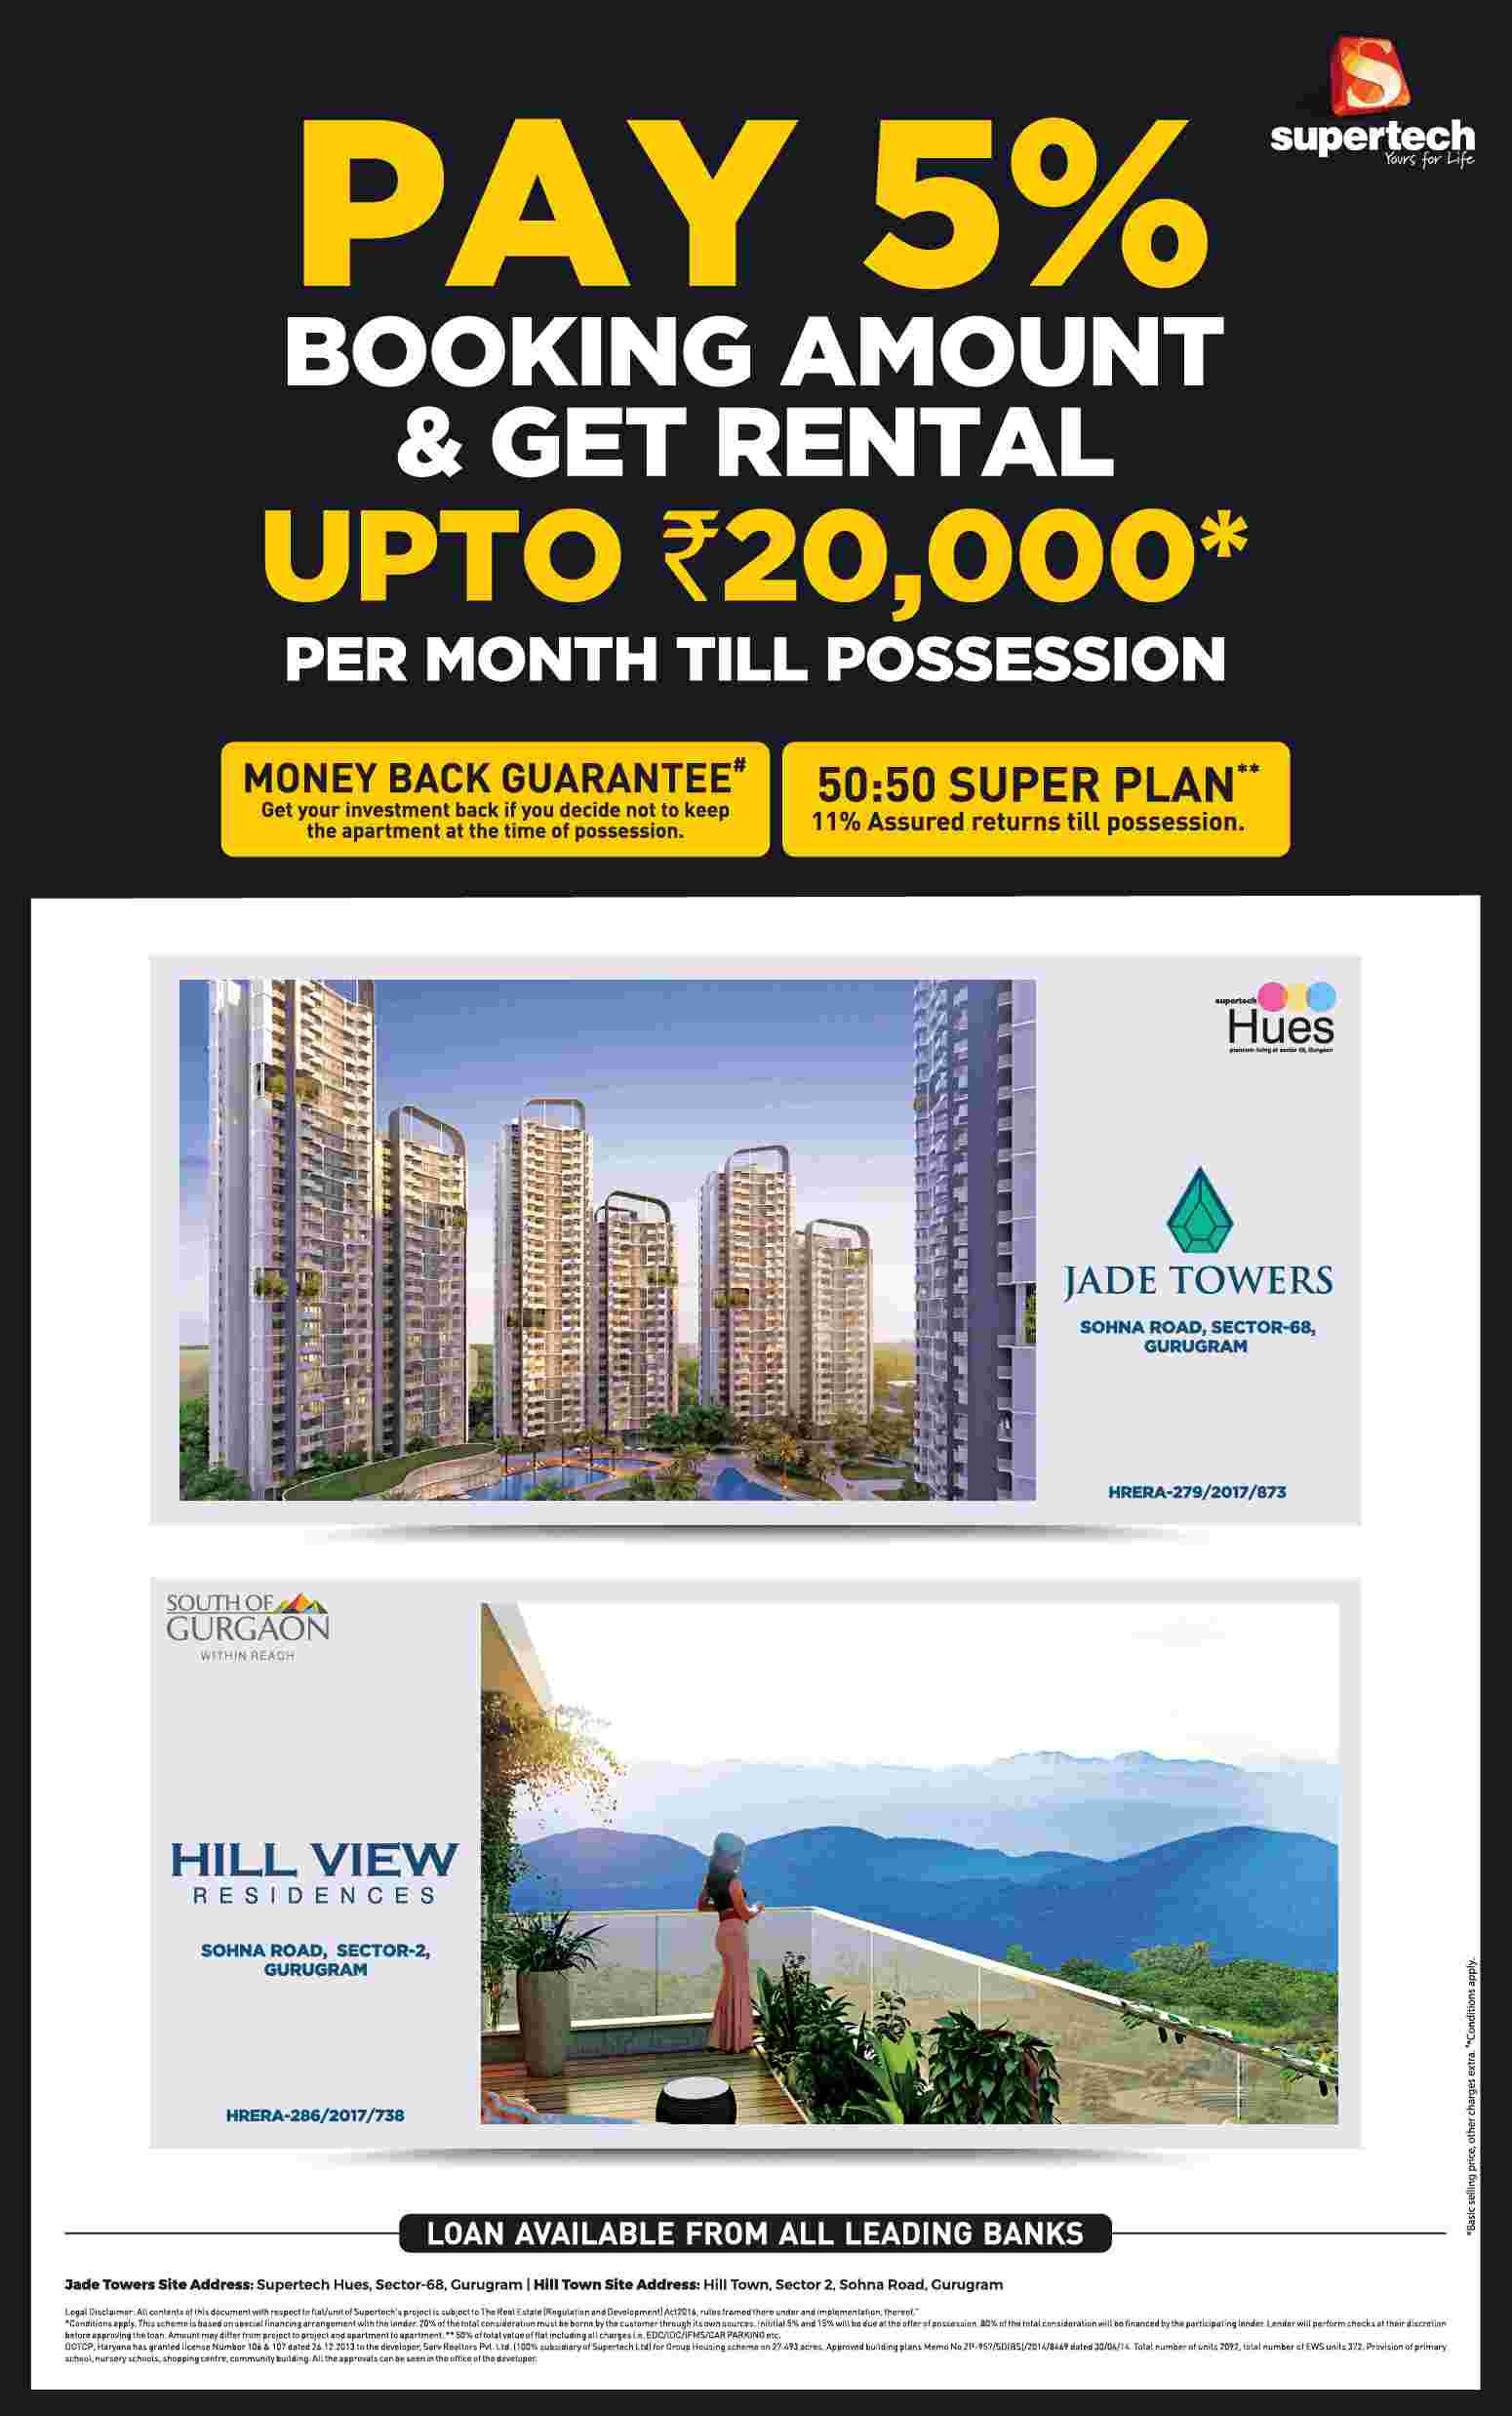 Pay 5% booking amount & get rental up to Rs. 20,000 per month till possession at Supertech projects in Gurgaon